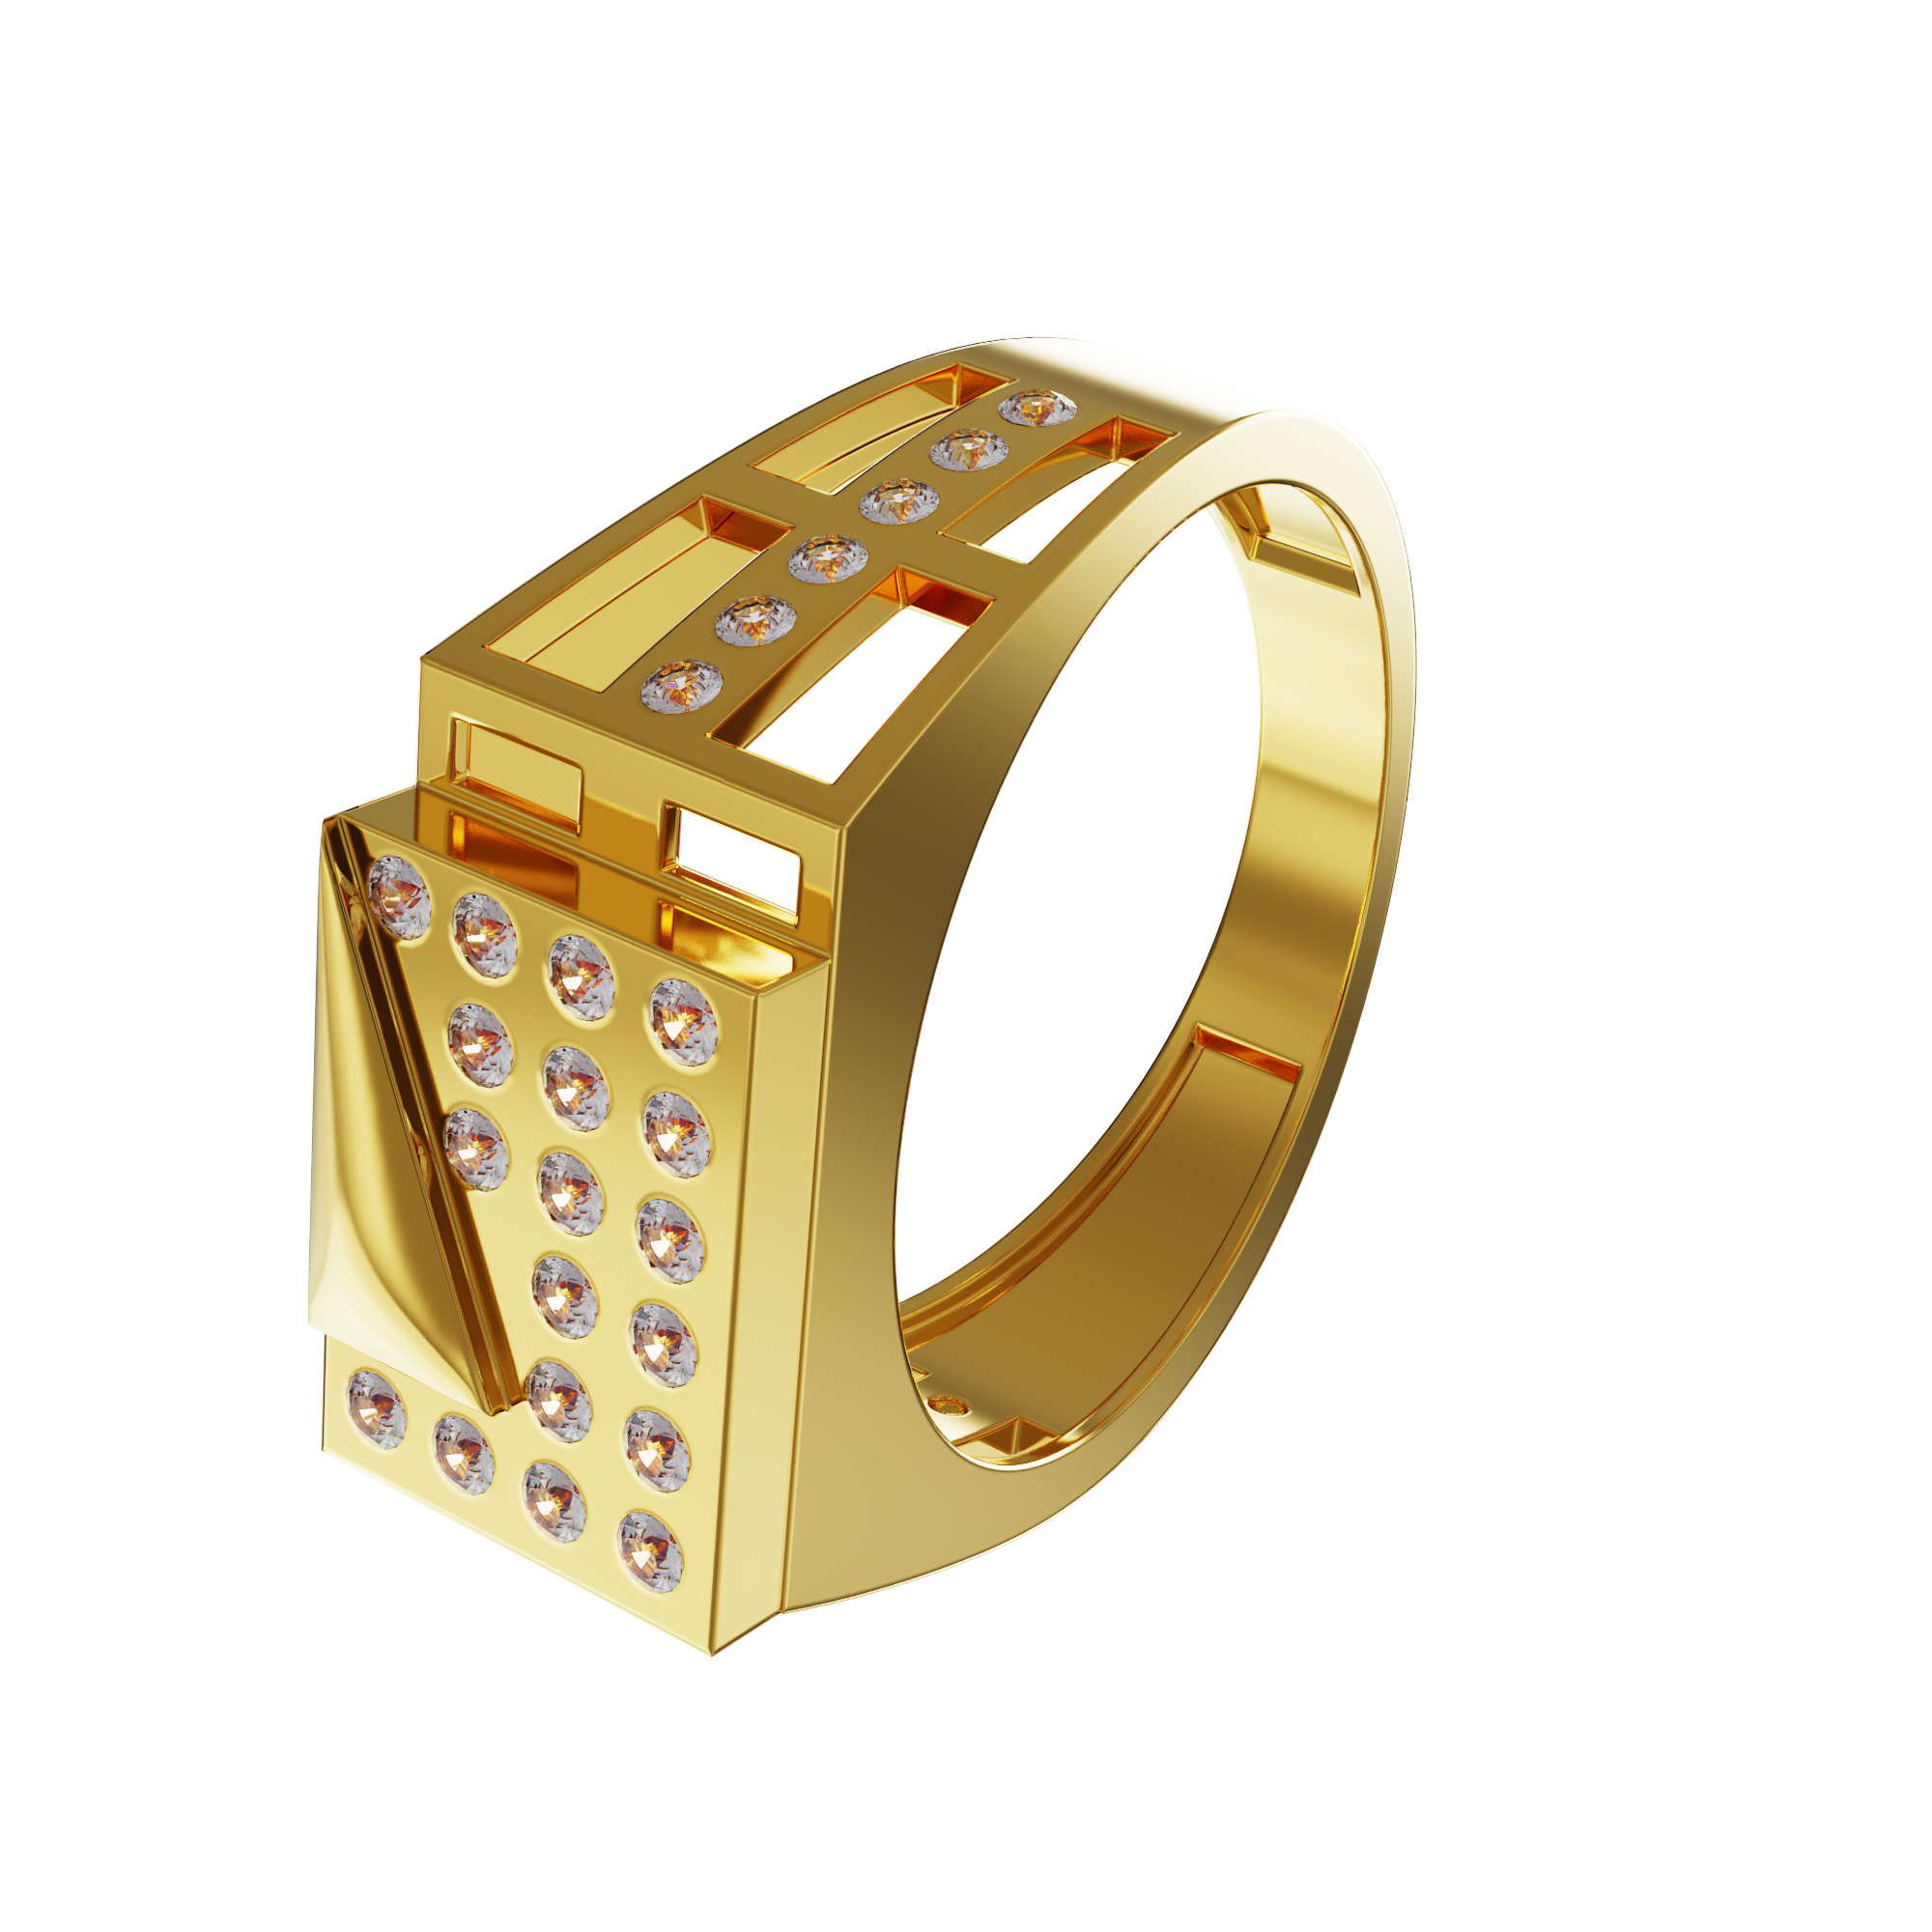 Best-jewel-Manufacturing-Company-in-Chennai